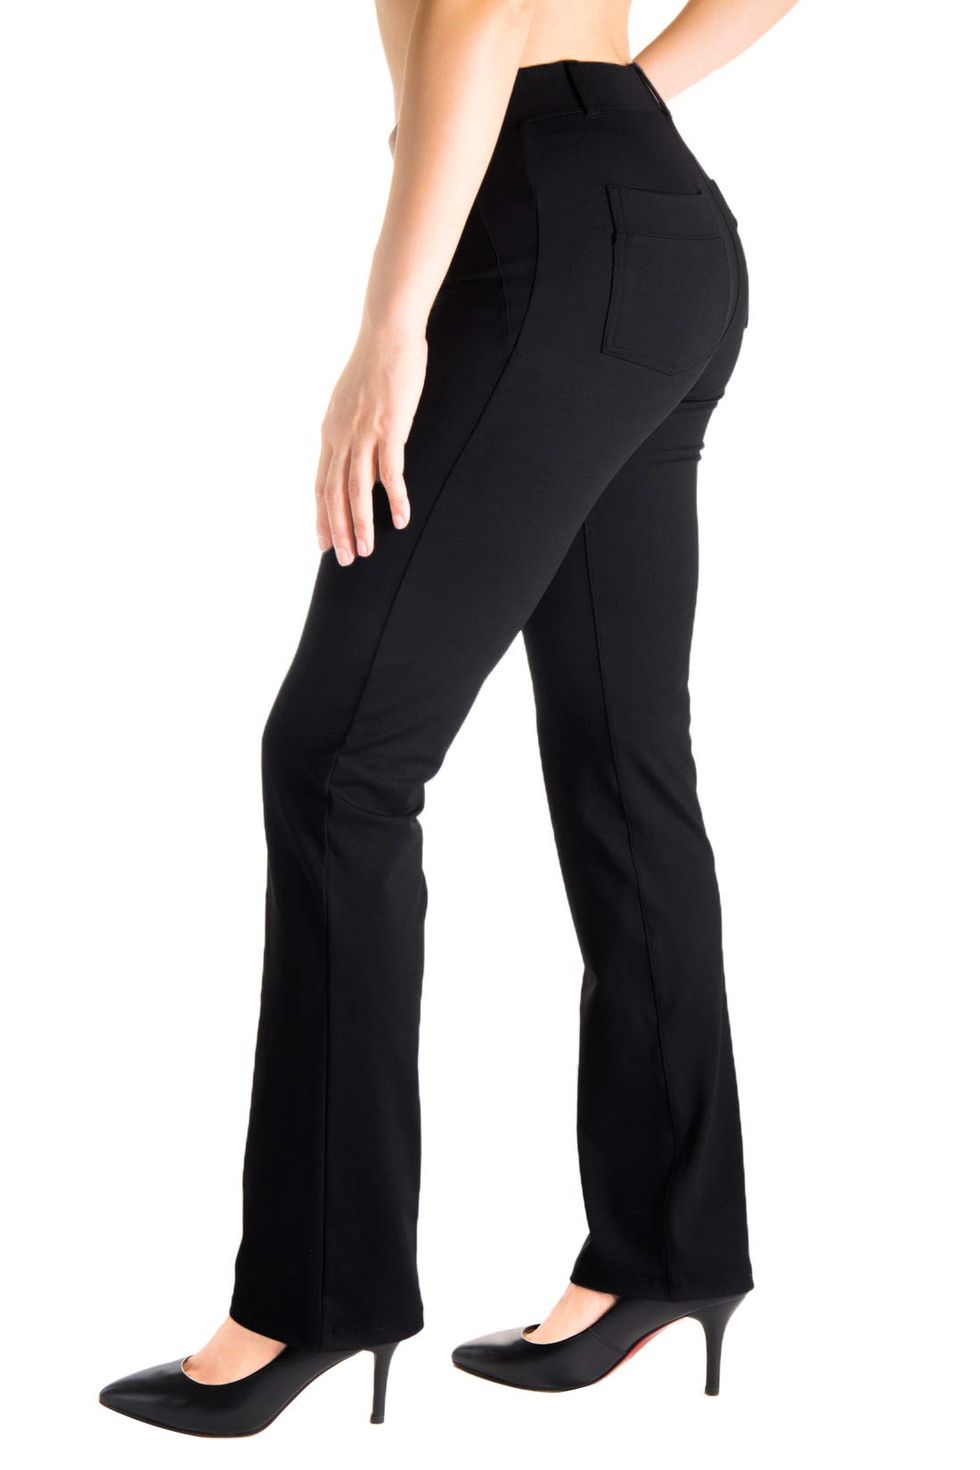 Tsful Black Faux Leather Leggings for Women Tummy Control High Waisted